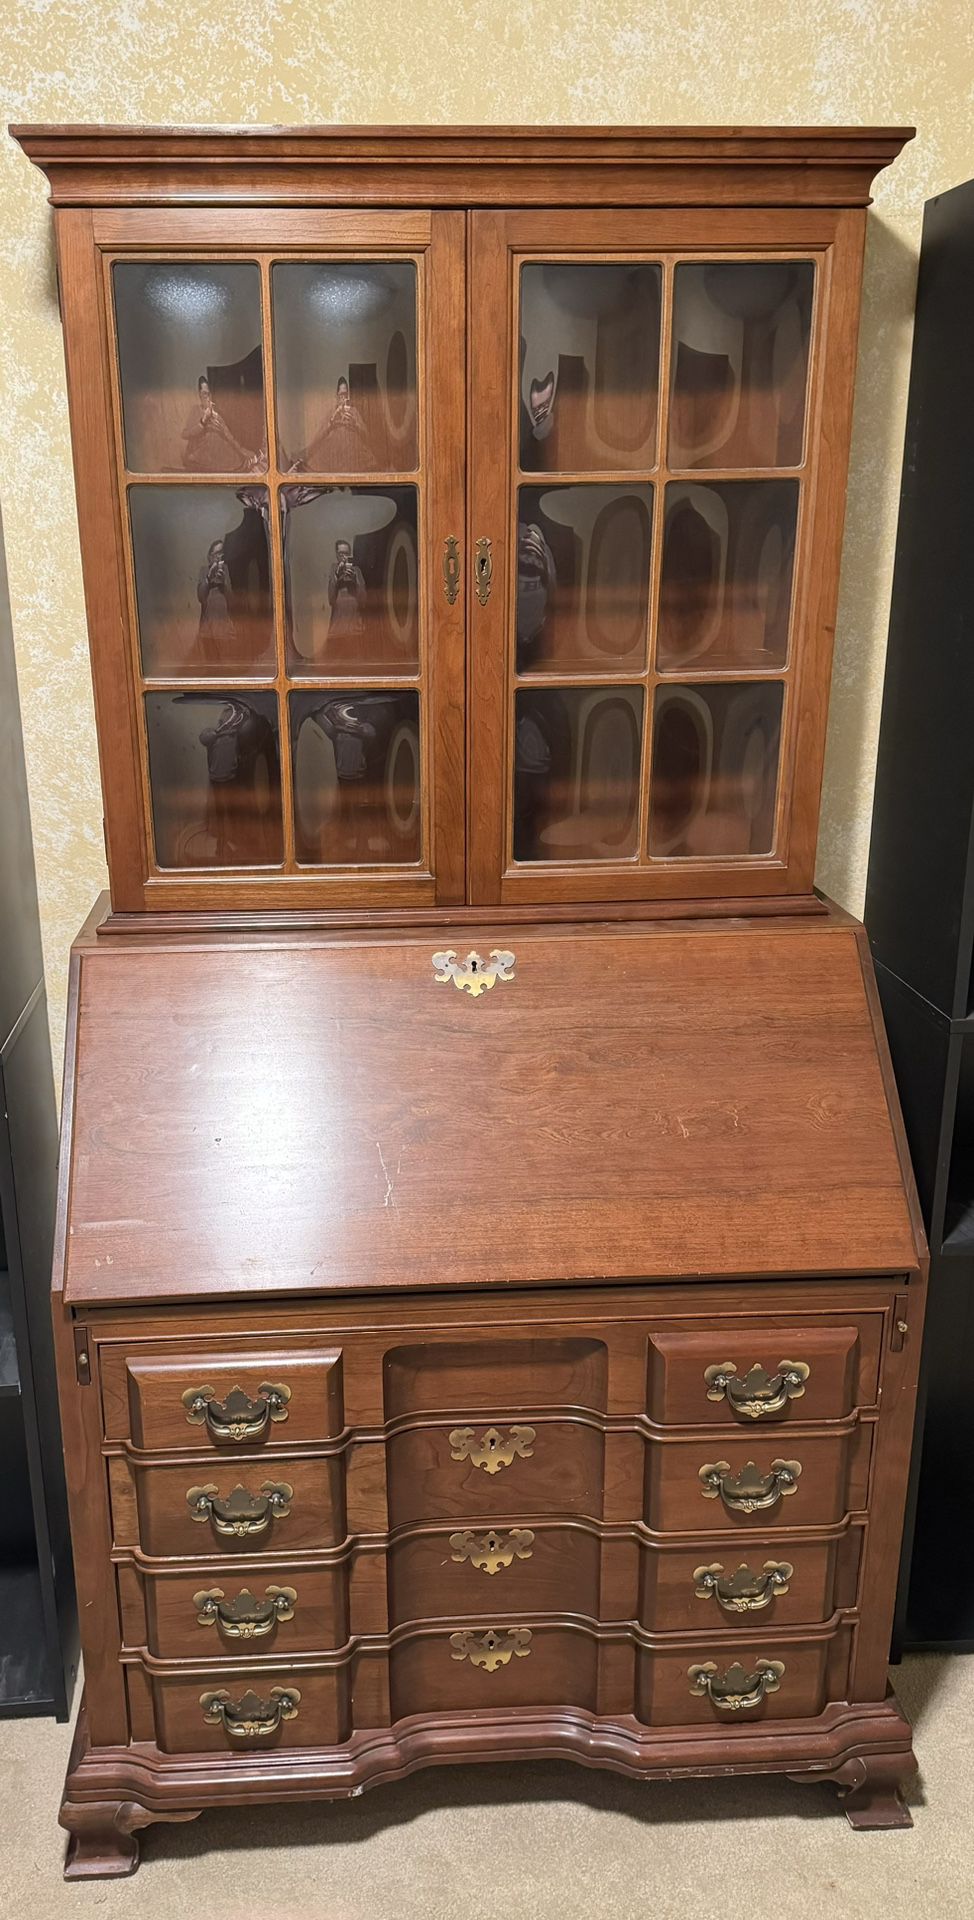 Maddox Of Jamestown Beautiful Wood Secretary Desk At Drawers And Removable Top Display Case At Glass And Key that works to lock desk, drawers and disp